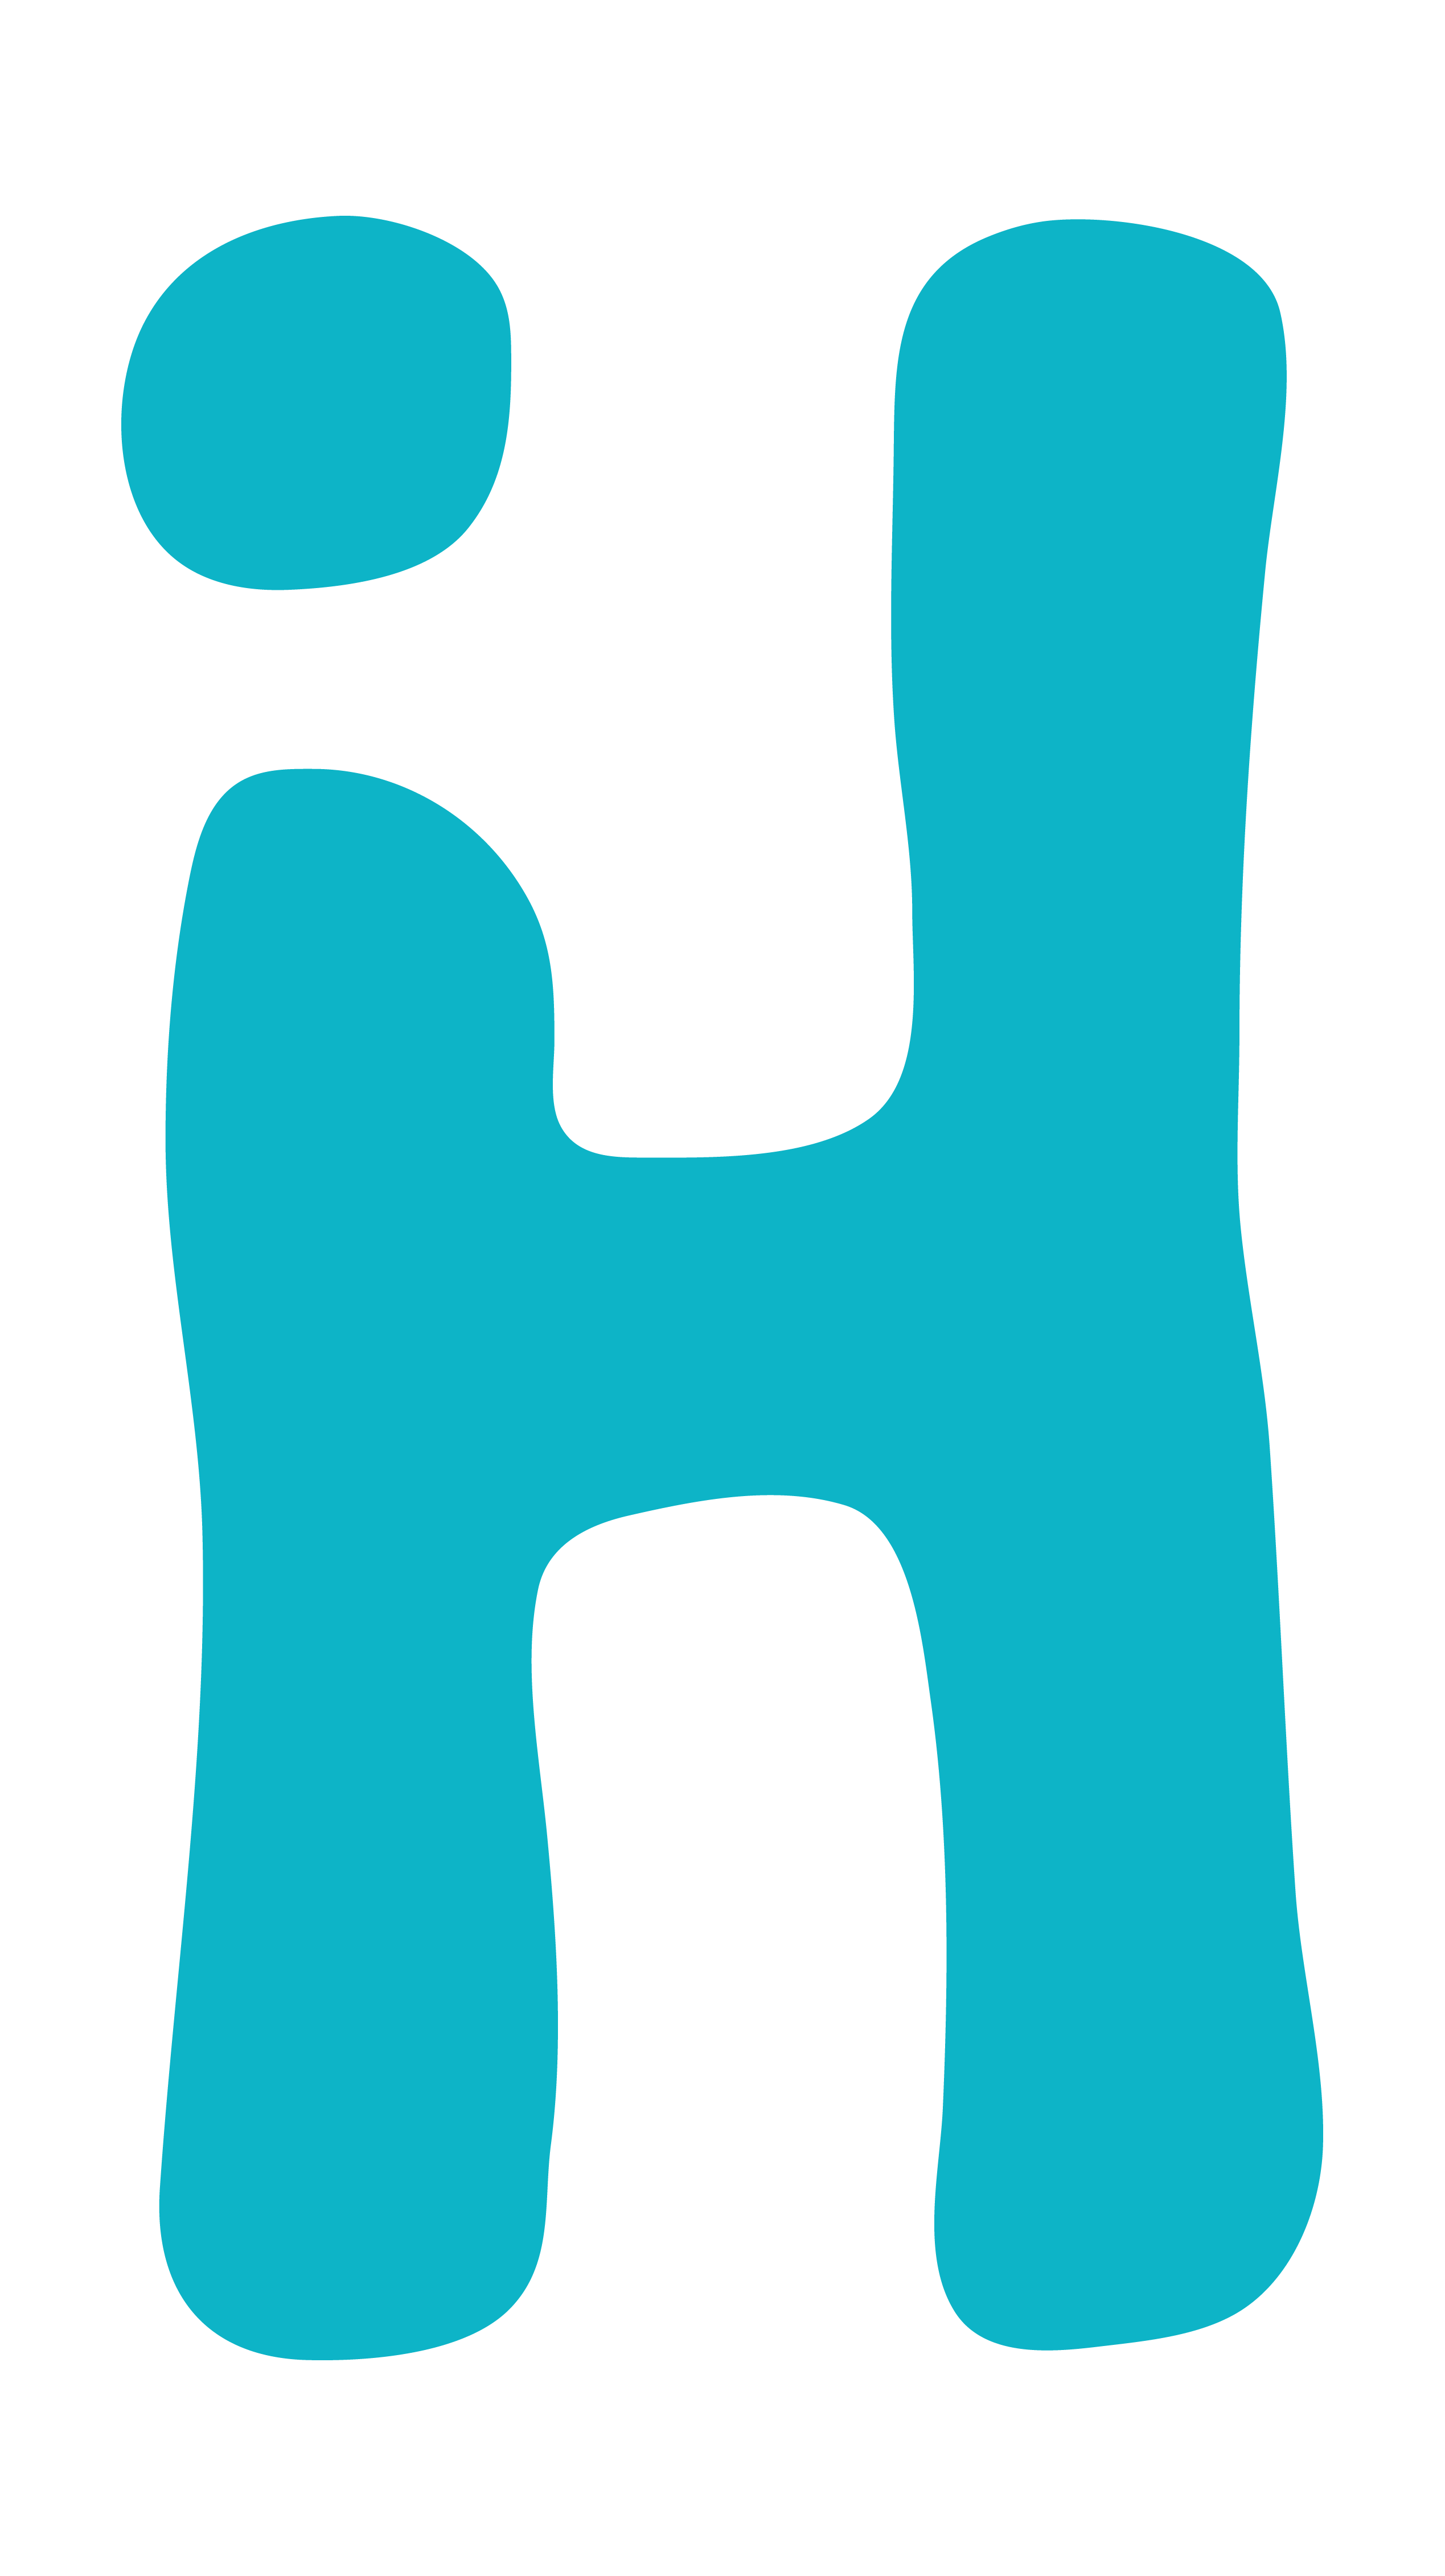 IndieHosters's logo